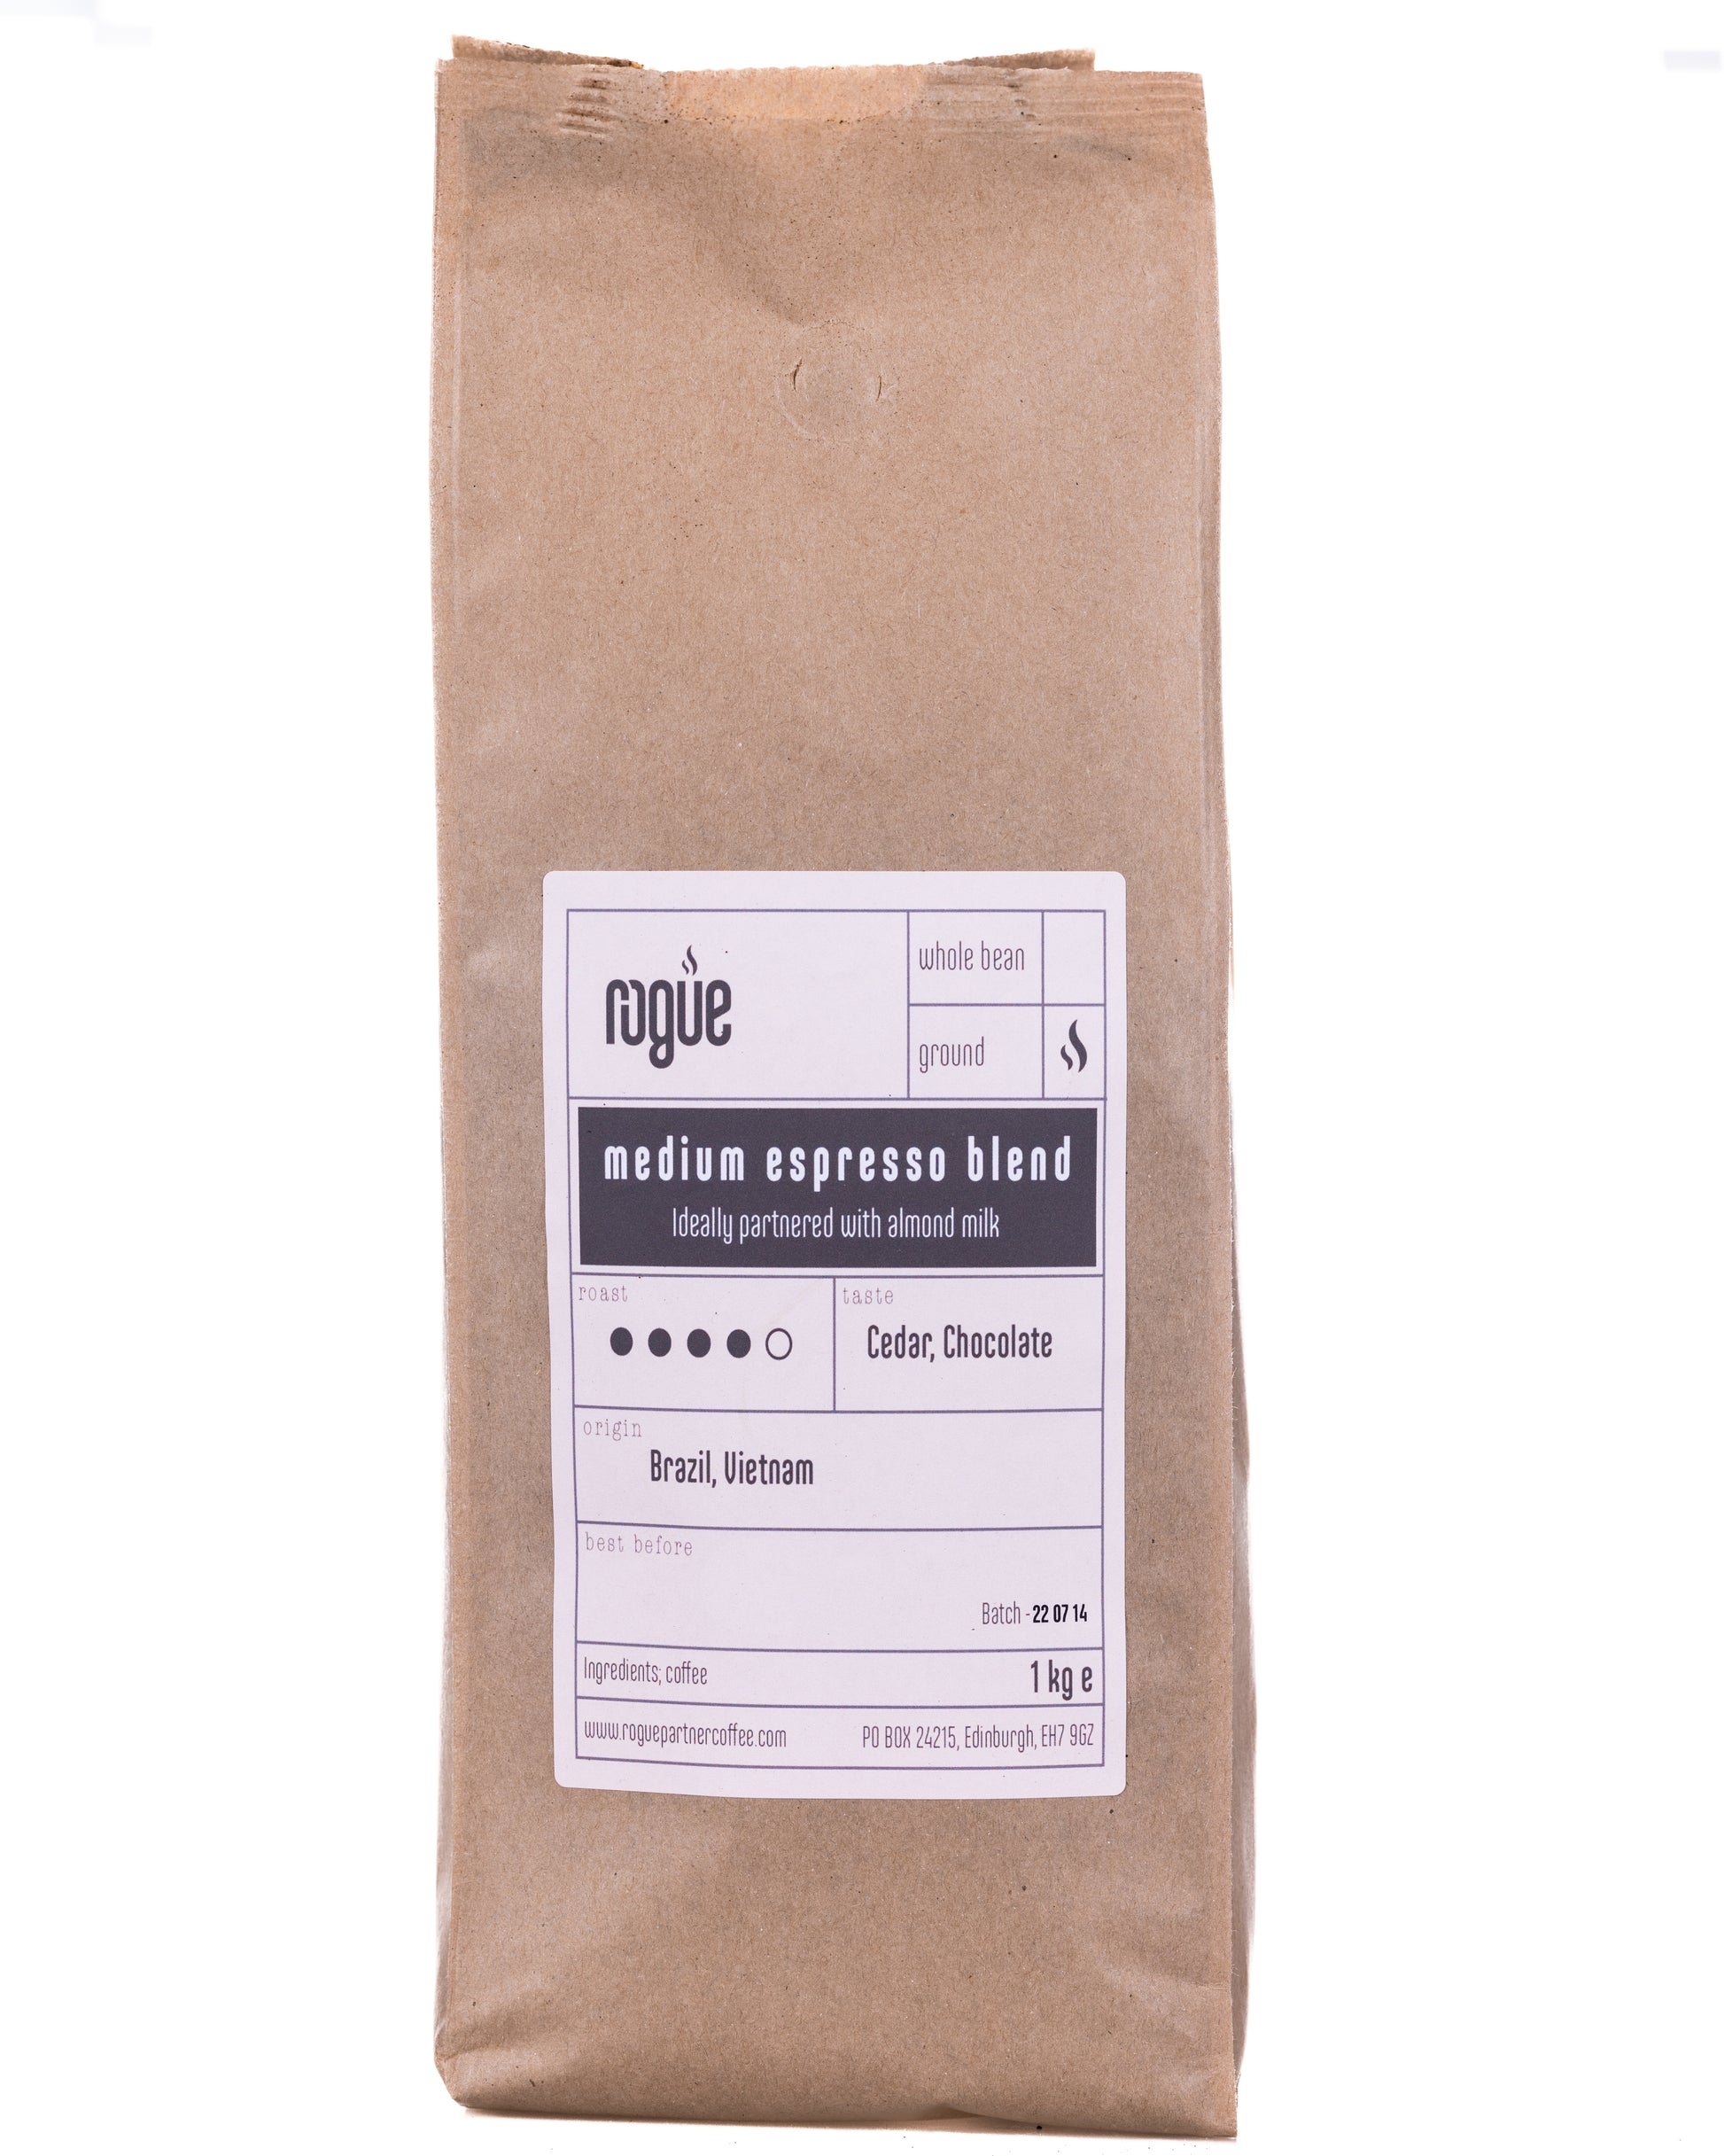 1kg kraft bag of medium espresso blend roast ground coffee from Rogue Partner Coffee. Tasting notes are dark chocolate. The origins of the beans are Brazil and Vietnam